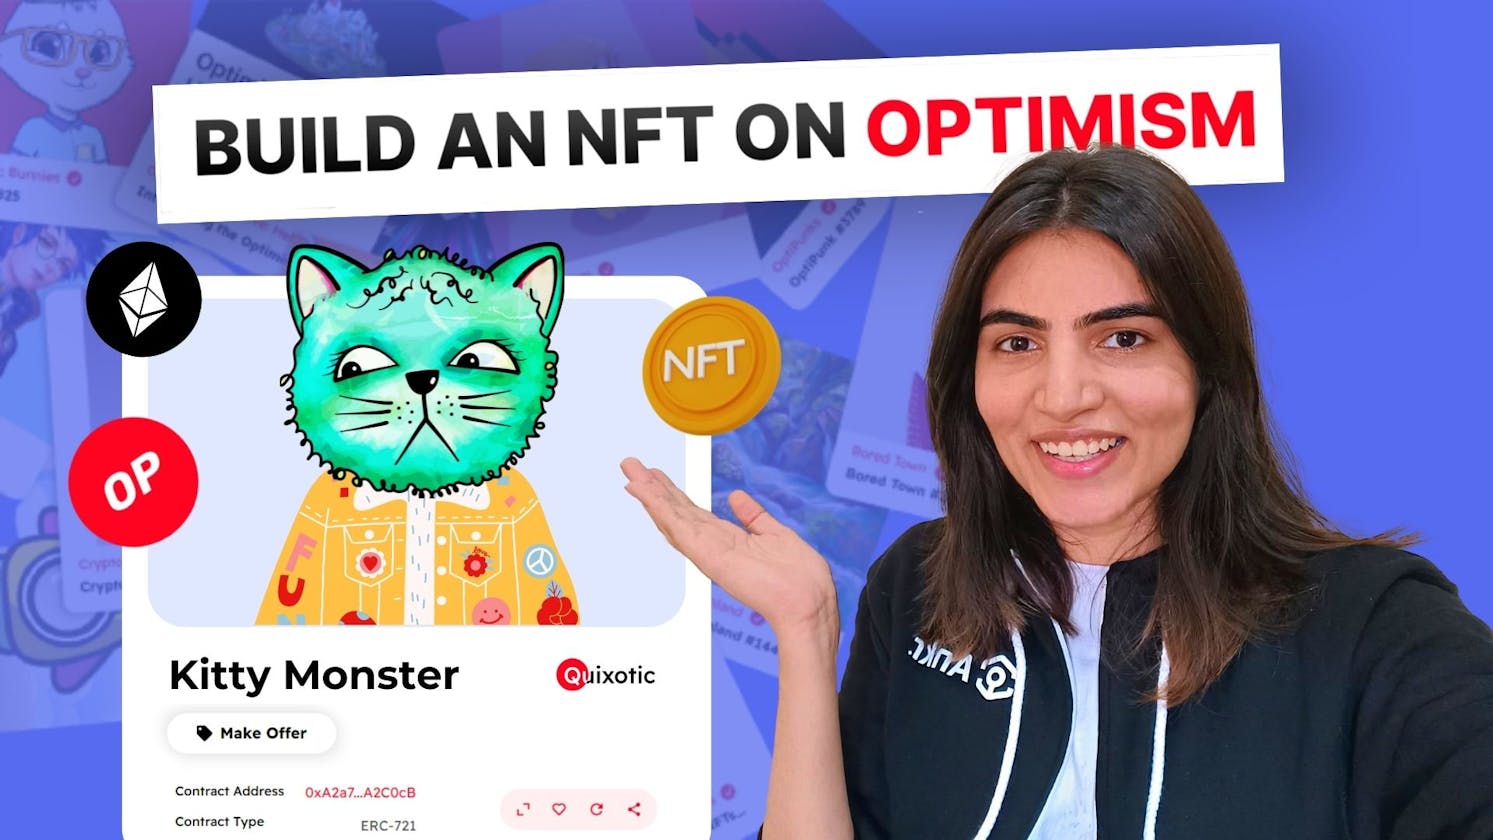 Deploy and Mint a CryptoKitties-Like NFT with ERC-721 Smart Contract